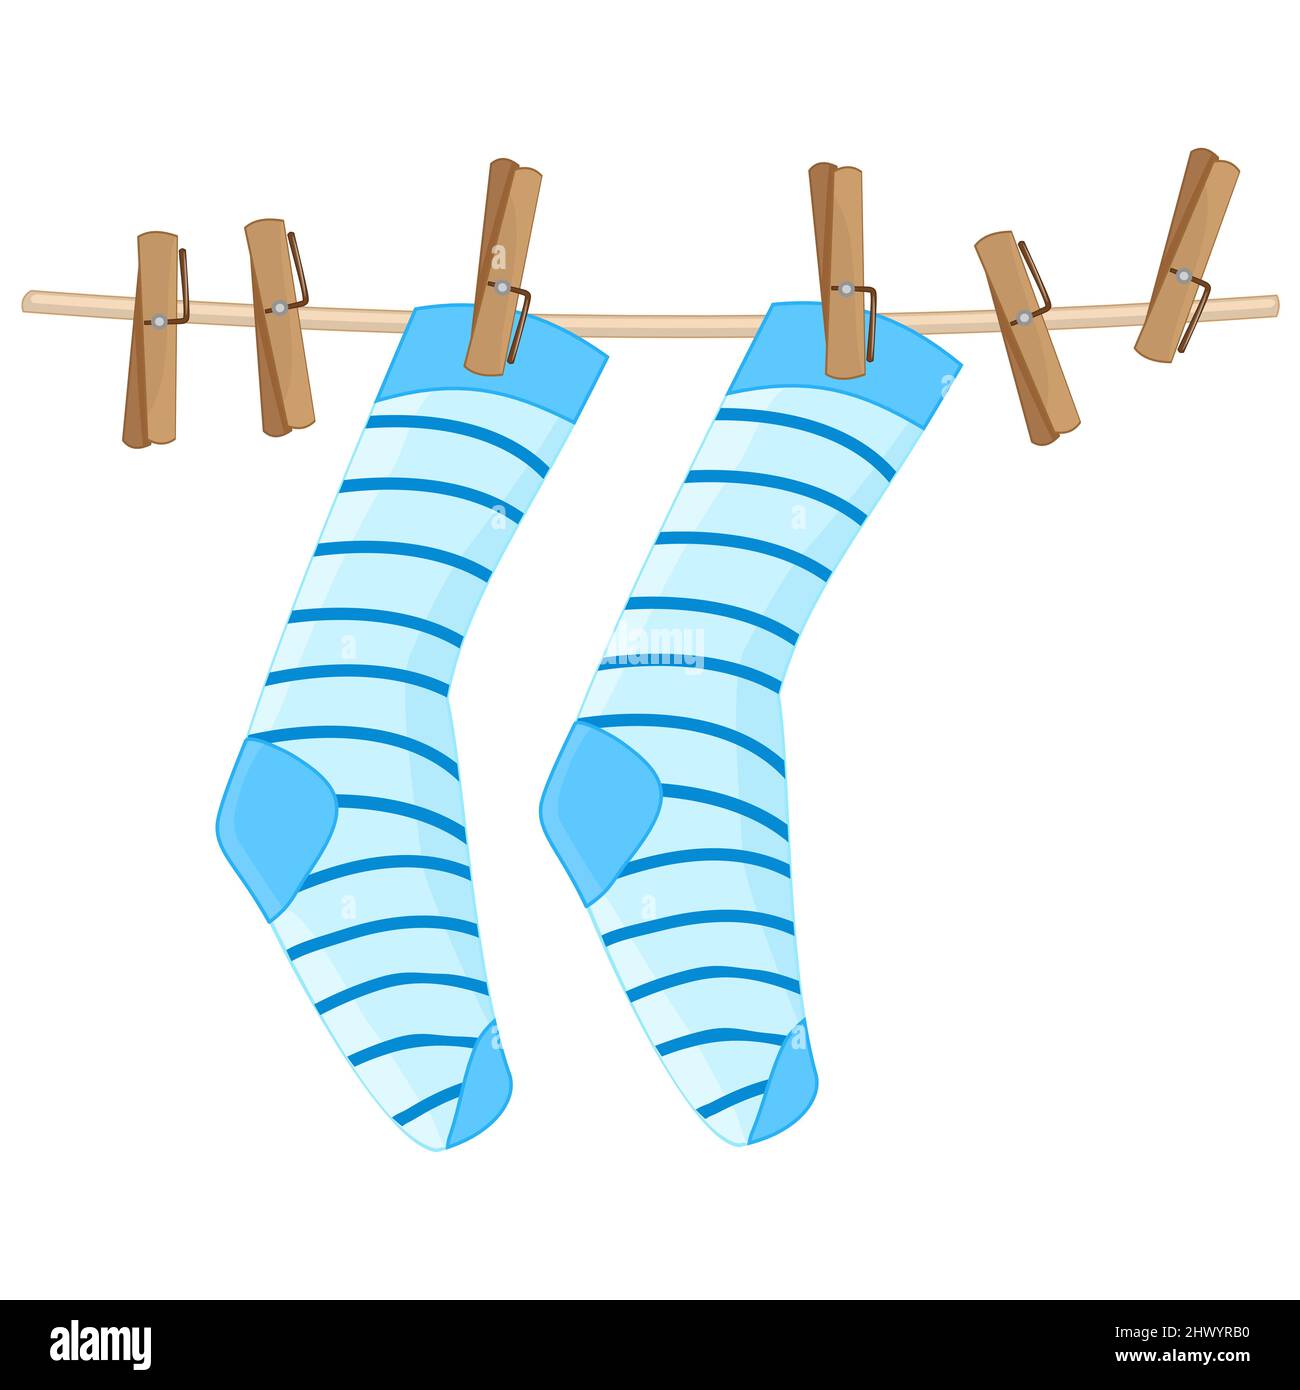 https://c8.alamy.com/comp/2HWYRB0/socks-hanging-on-ropedblue-striped-socks-on-clotheslinecotton-or-wool-sock-dry-and-hang-on-laundry-string-with-clothespinlaundry-drying-iconvector-2HWYRB0.jpg